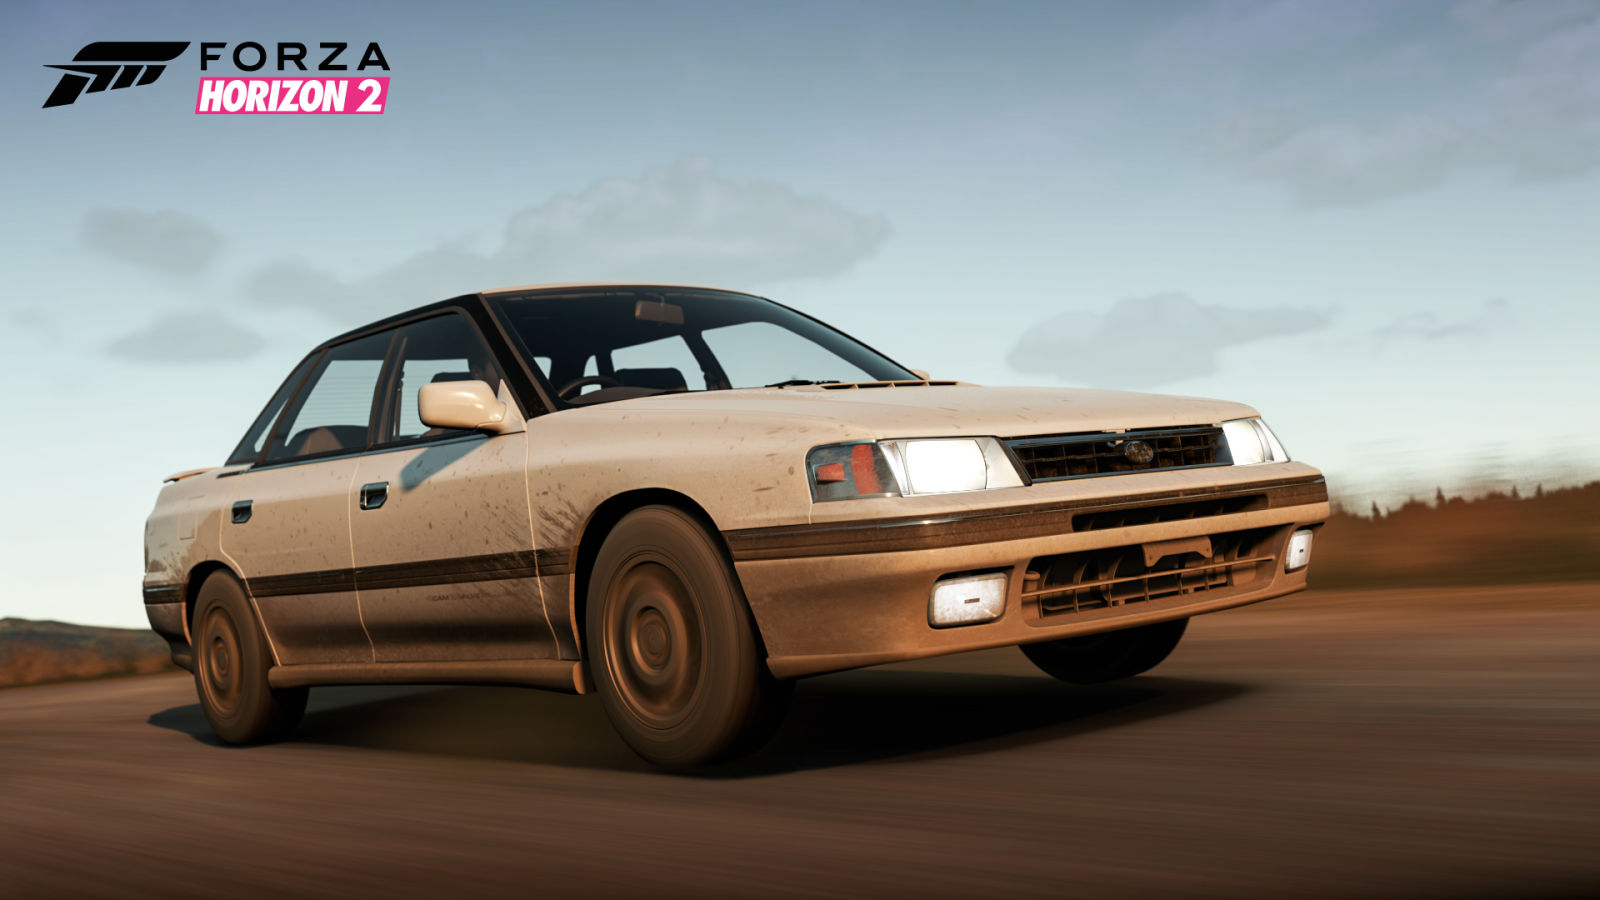 Illustration for article titled Forza Horizon 2 is 5 or 6 bucks on xbox store.